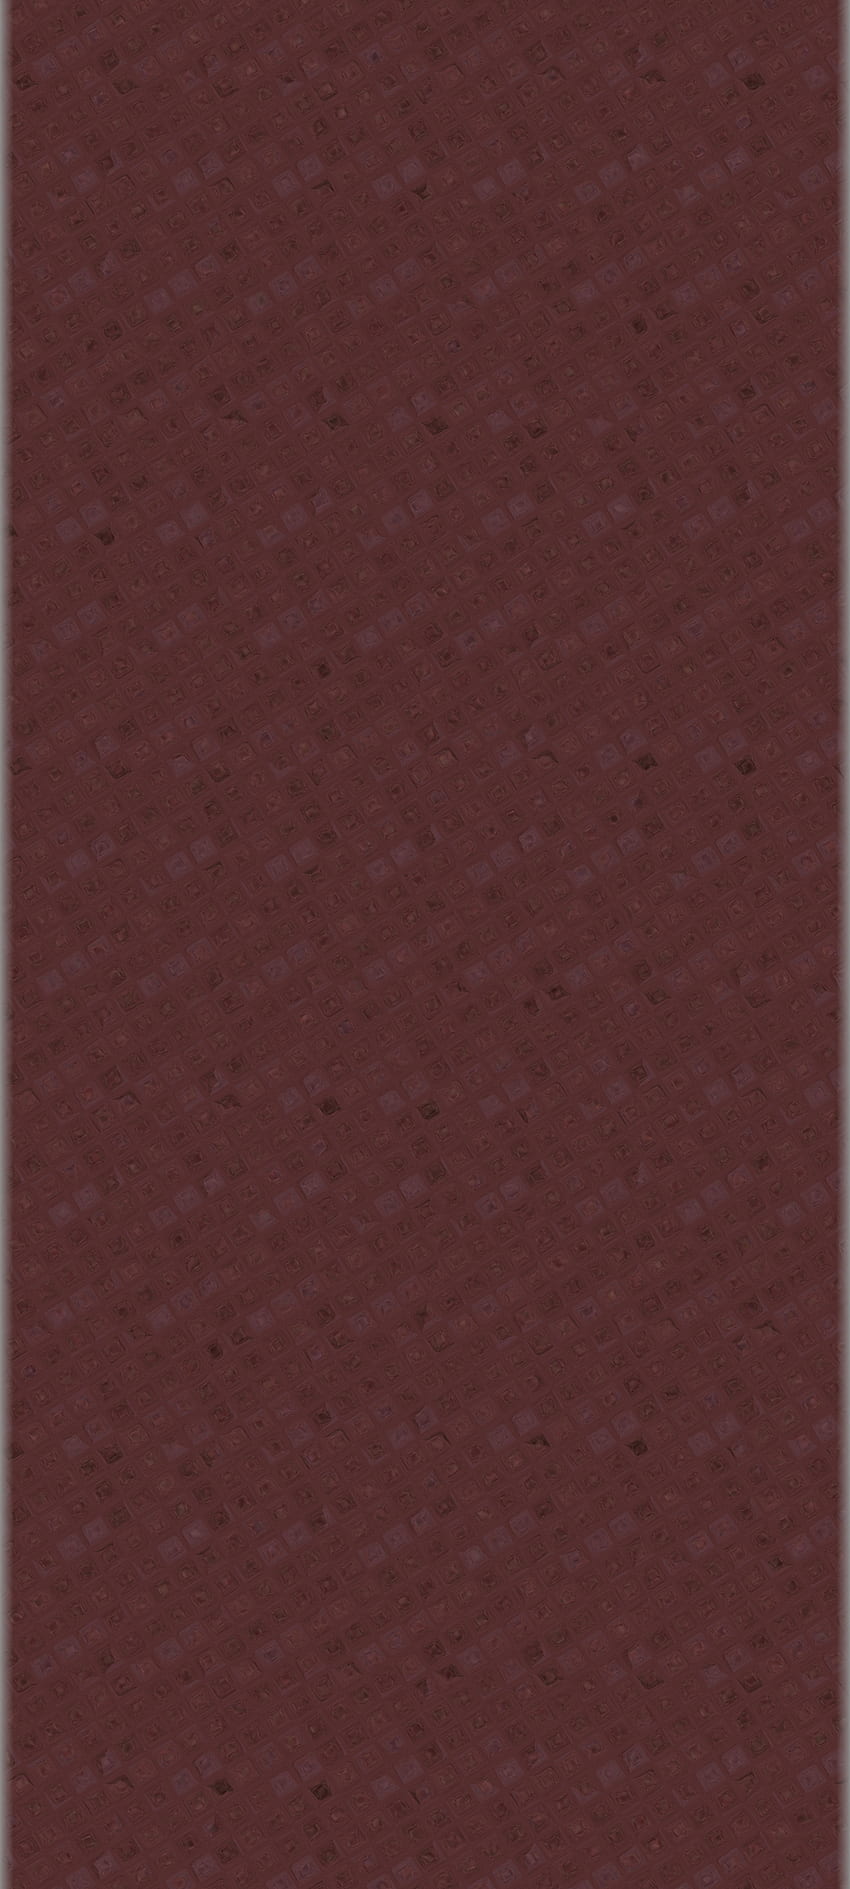 No1-Home Screen, iPhone, Basic, Galaxy, New, Art, iPhone 13, pattern, Cool, Modern, Surface, , design, Smooth, locked, A51, soft, Background, Galaxy S21, Druffix, 2021, brown, M32, Magma, Android, Acer, No1, Apple, Cores, S10, Galaxy A32, Amor, Tela Inicial, LG, Samsung, Edge, Nokia, Original, Smartphone Papel de parede de celular HD